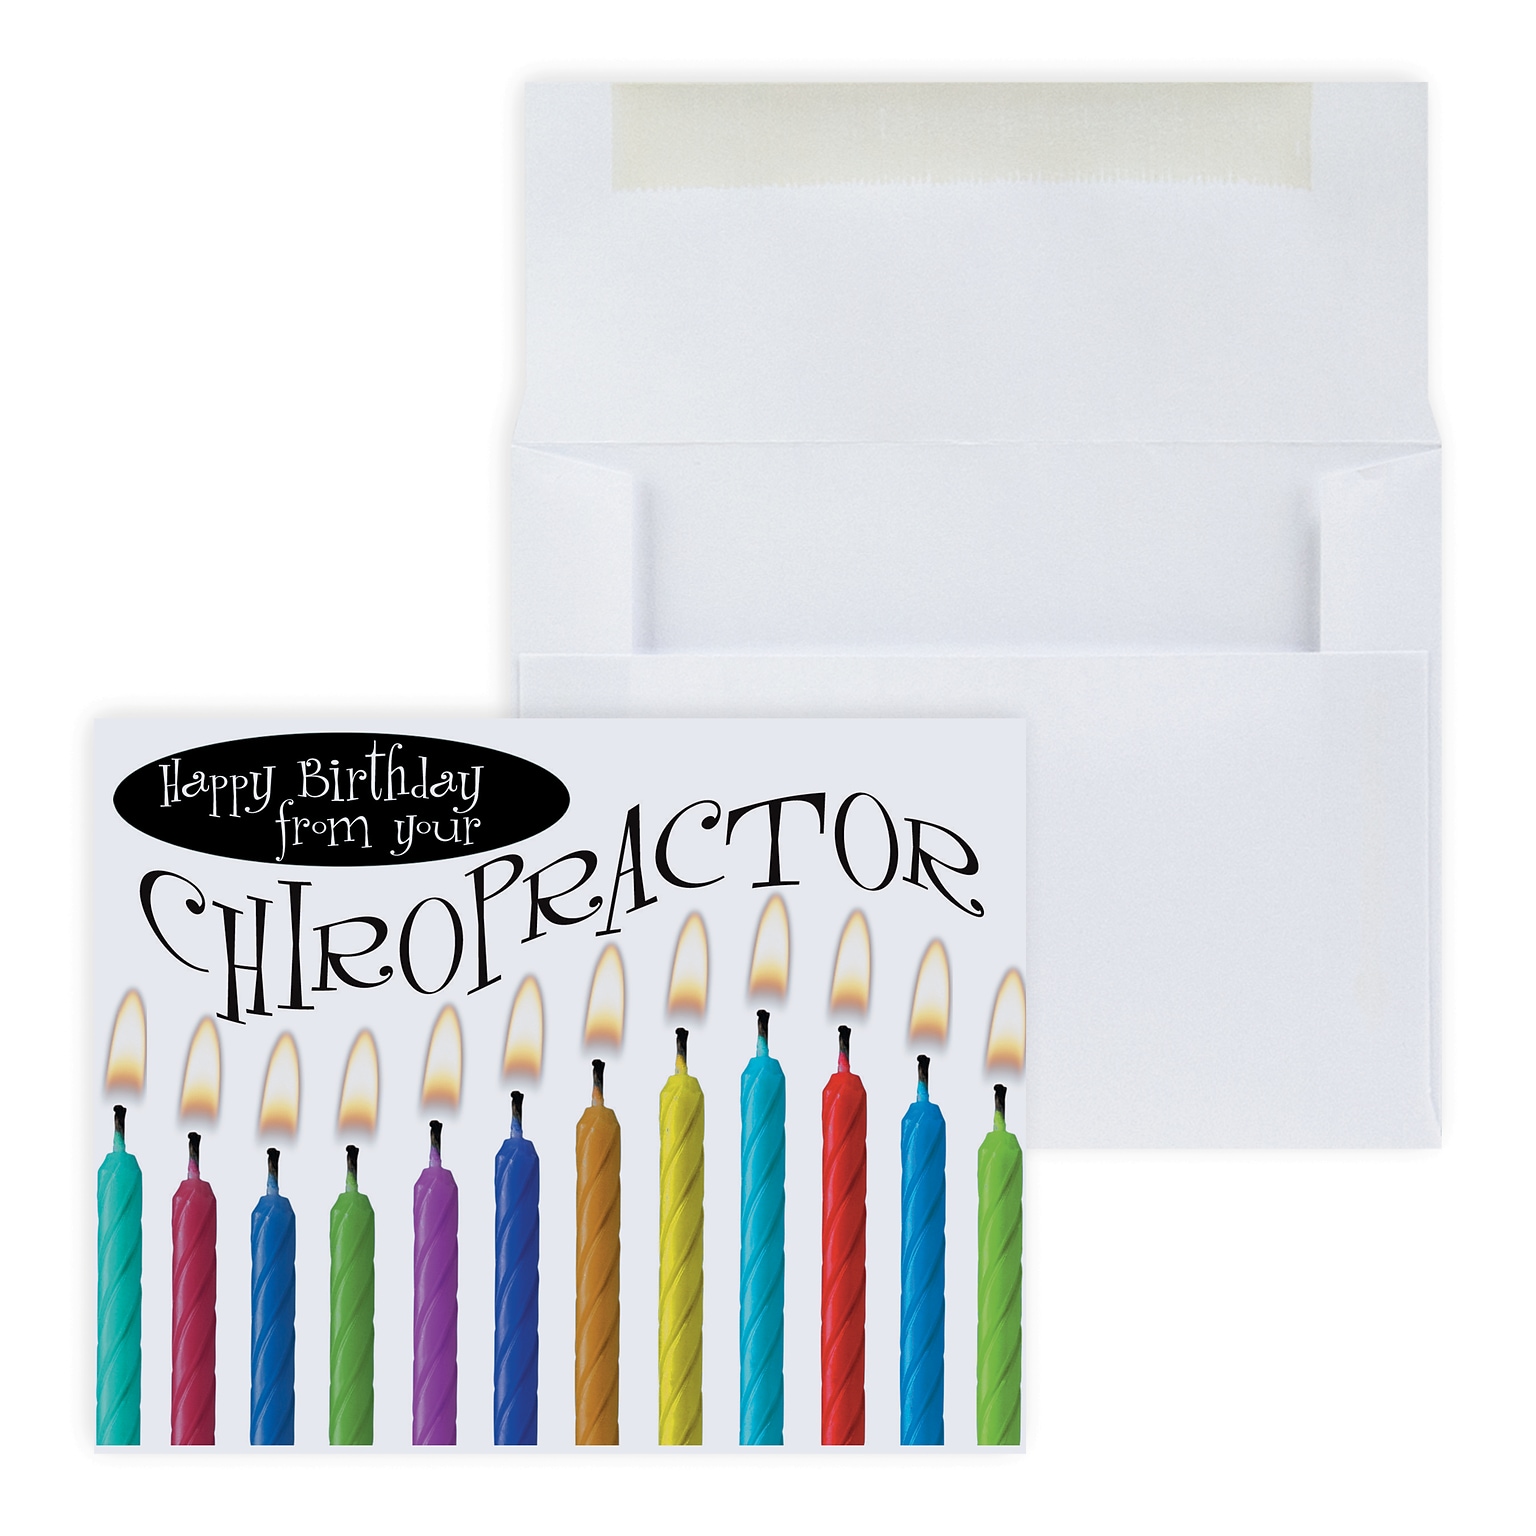 Custom Birthday Candles Chiropractor Greeting Cards, With Envelopes, 5-3/8 x 4-1/4, 25 Cards per Set